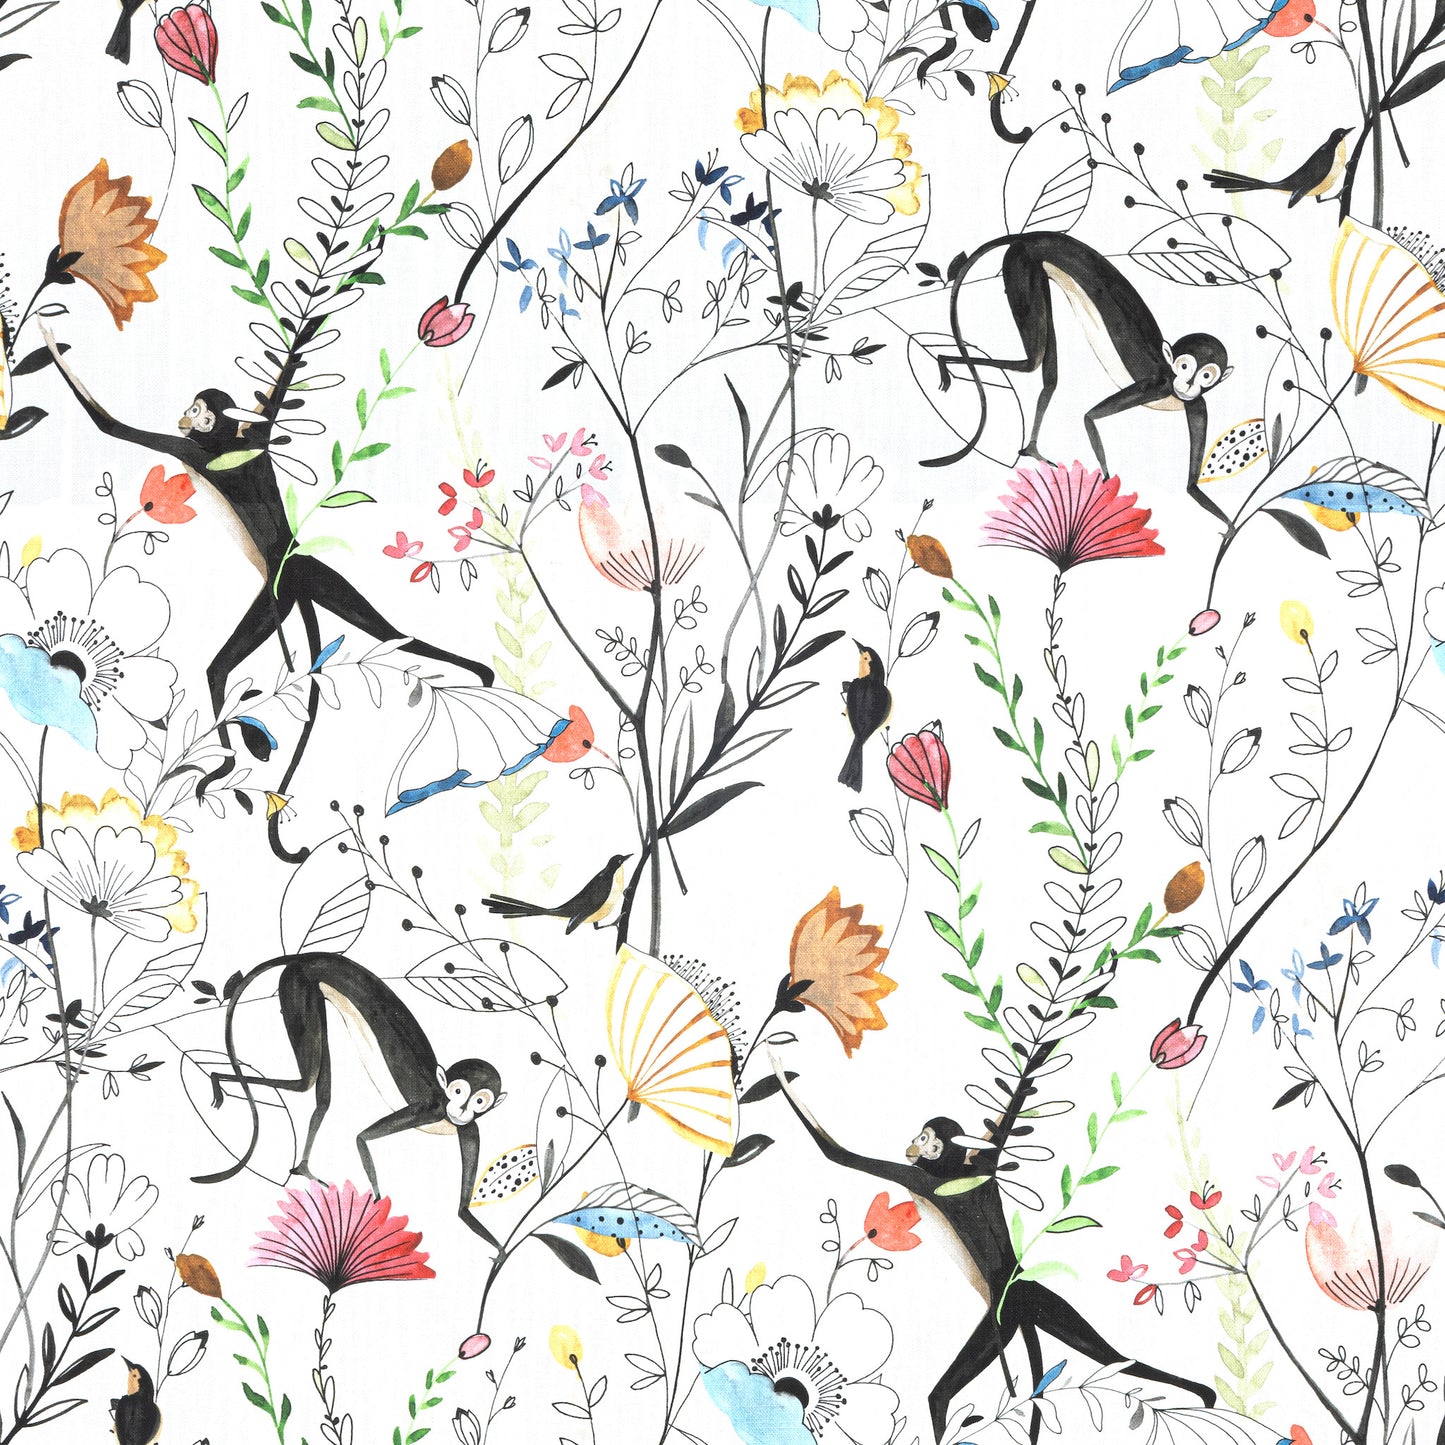 Pillow Sham in Entangled, a Monkey & Bird Watercolor Floral Jungle